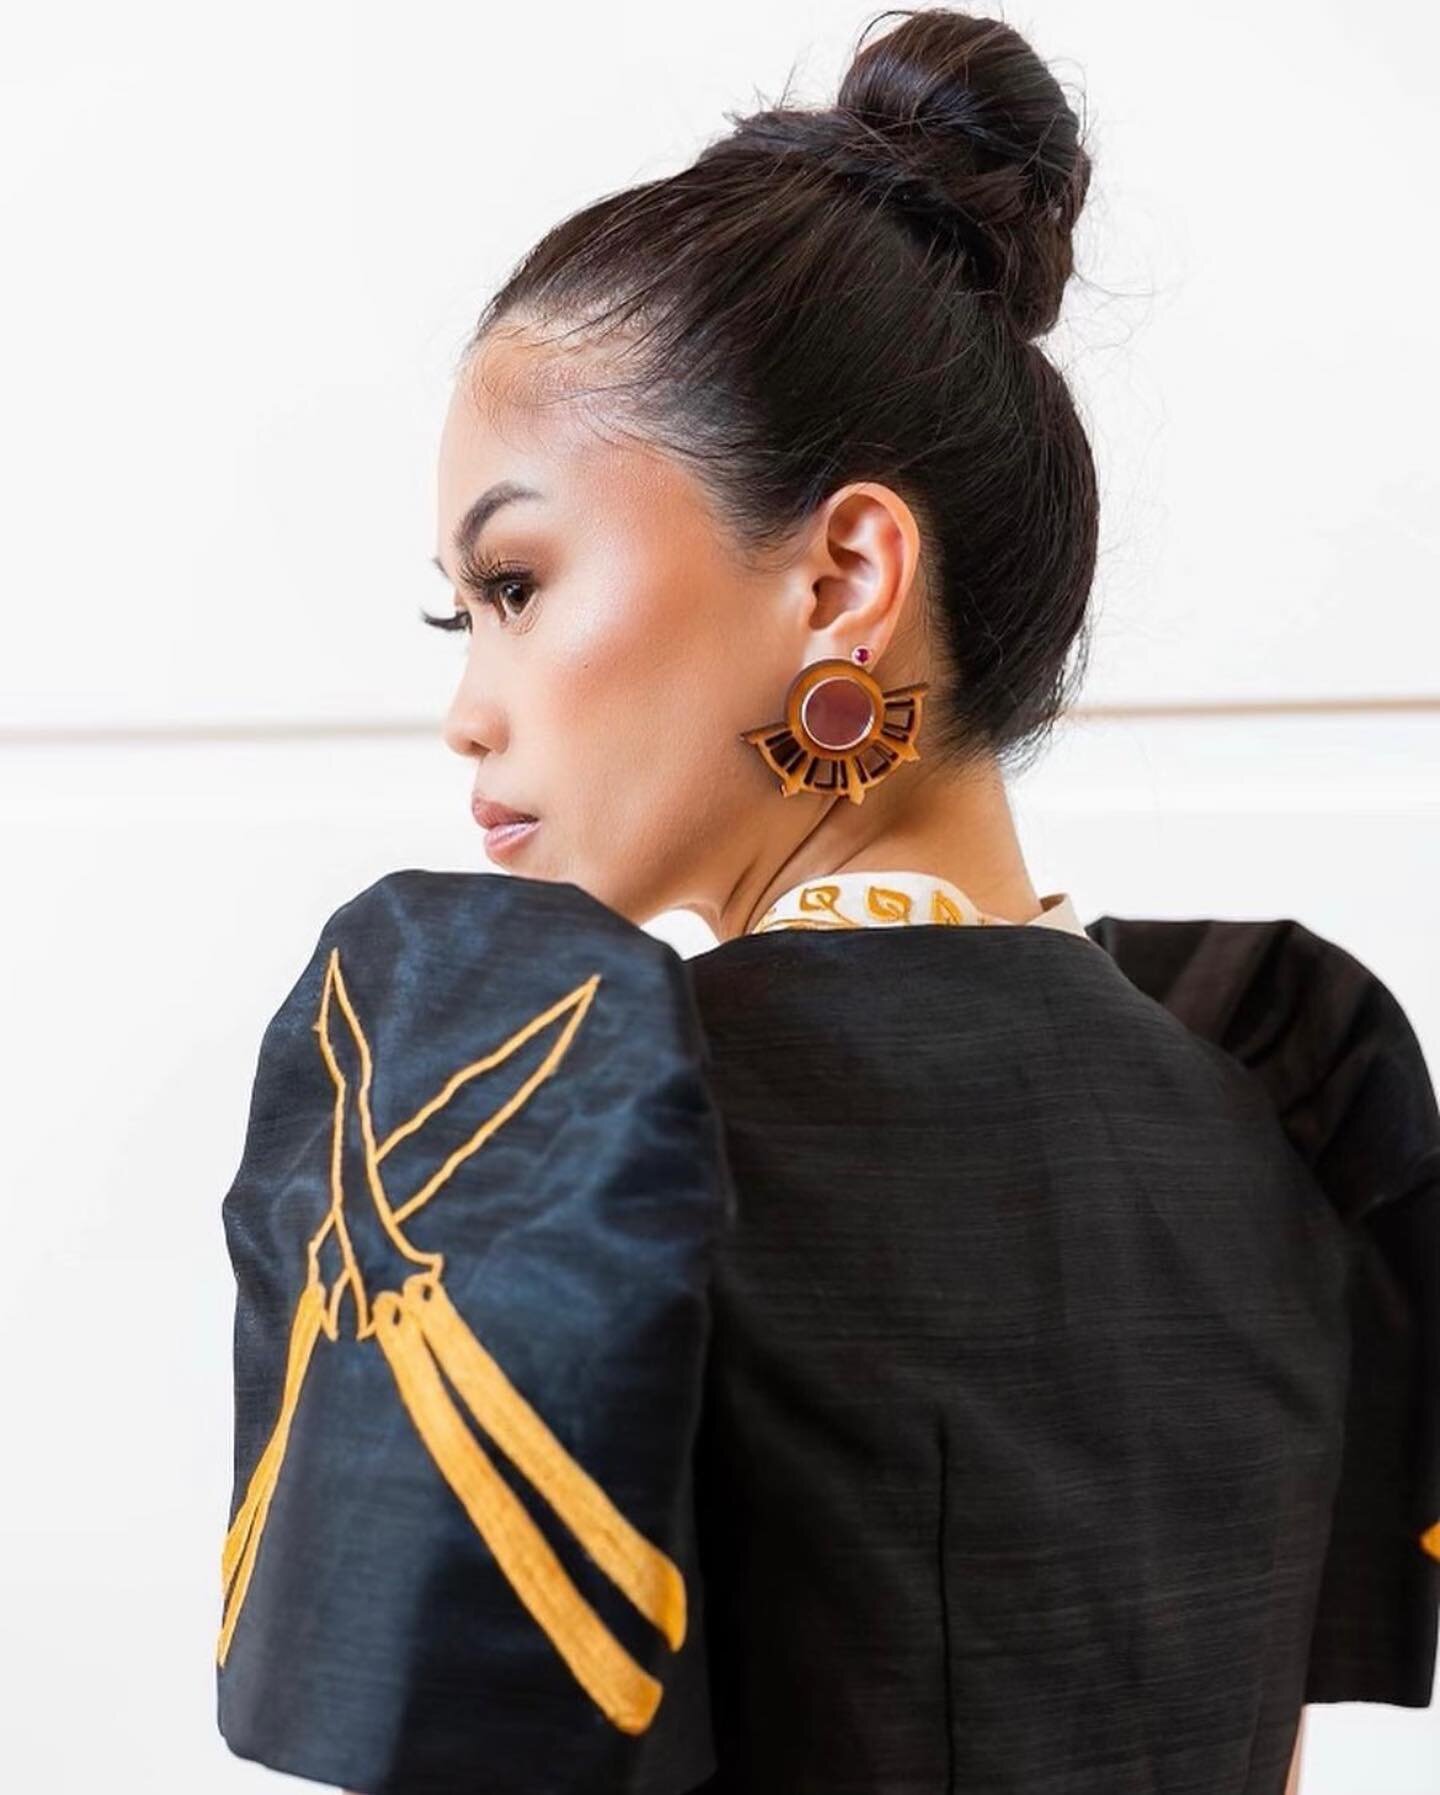 🔥EXCUSE U🔥 our Issue 02 cover star @rubyibarra in @brwngrlz Sarili earrings and custom Filipiniana at the #grammys 

Photo: @krislumague for @myxglobal